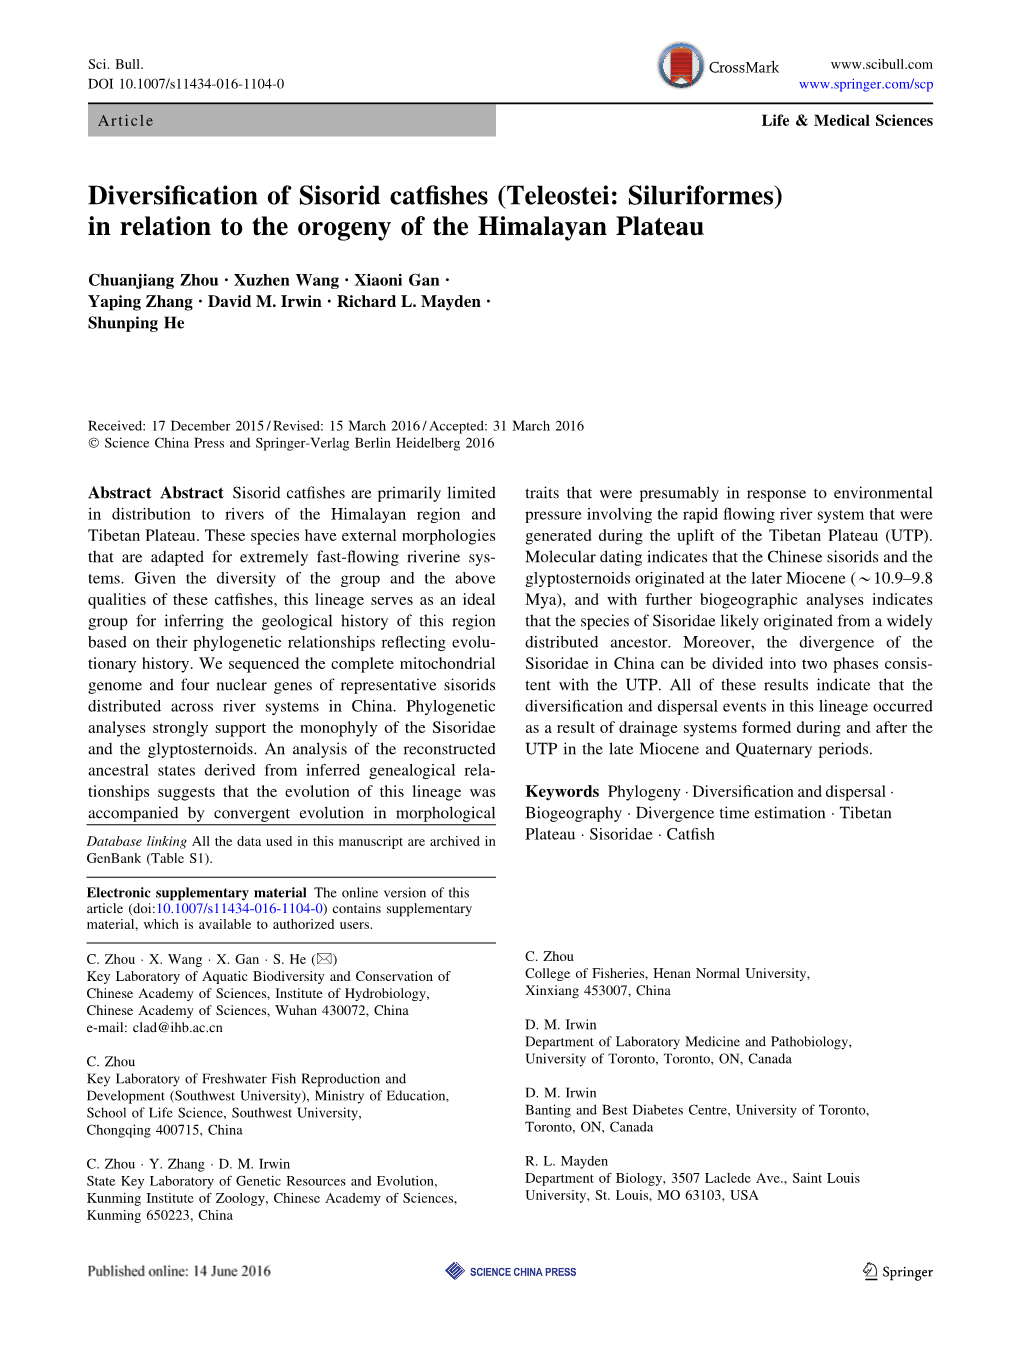 Diversification of Sisorid Catfishes (Teleostei: Siluriformes) in Relation